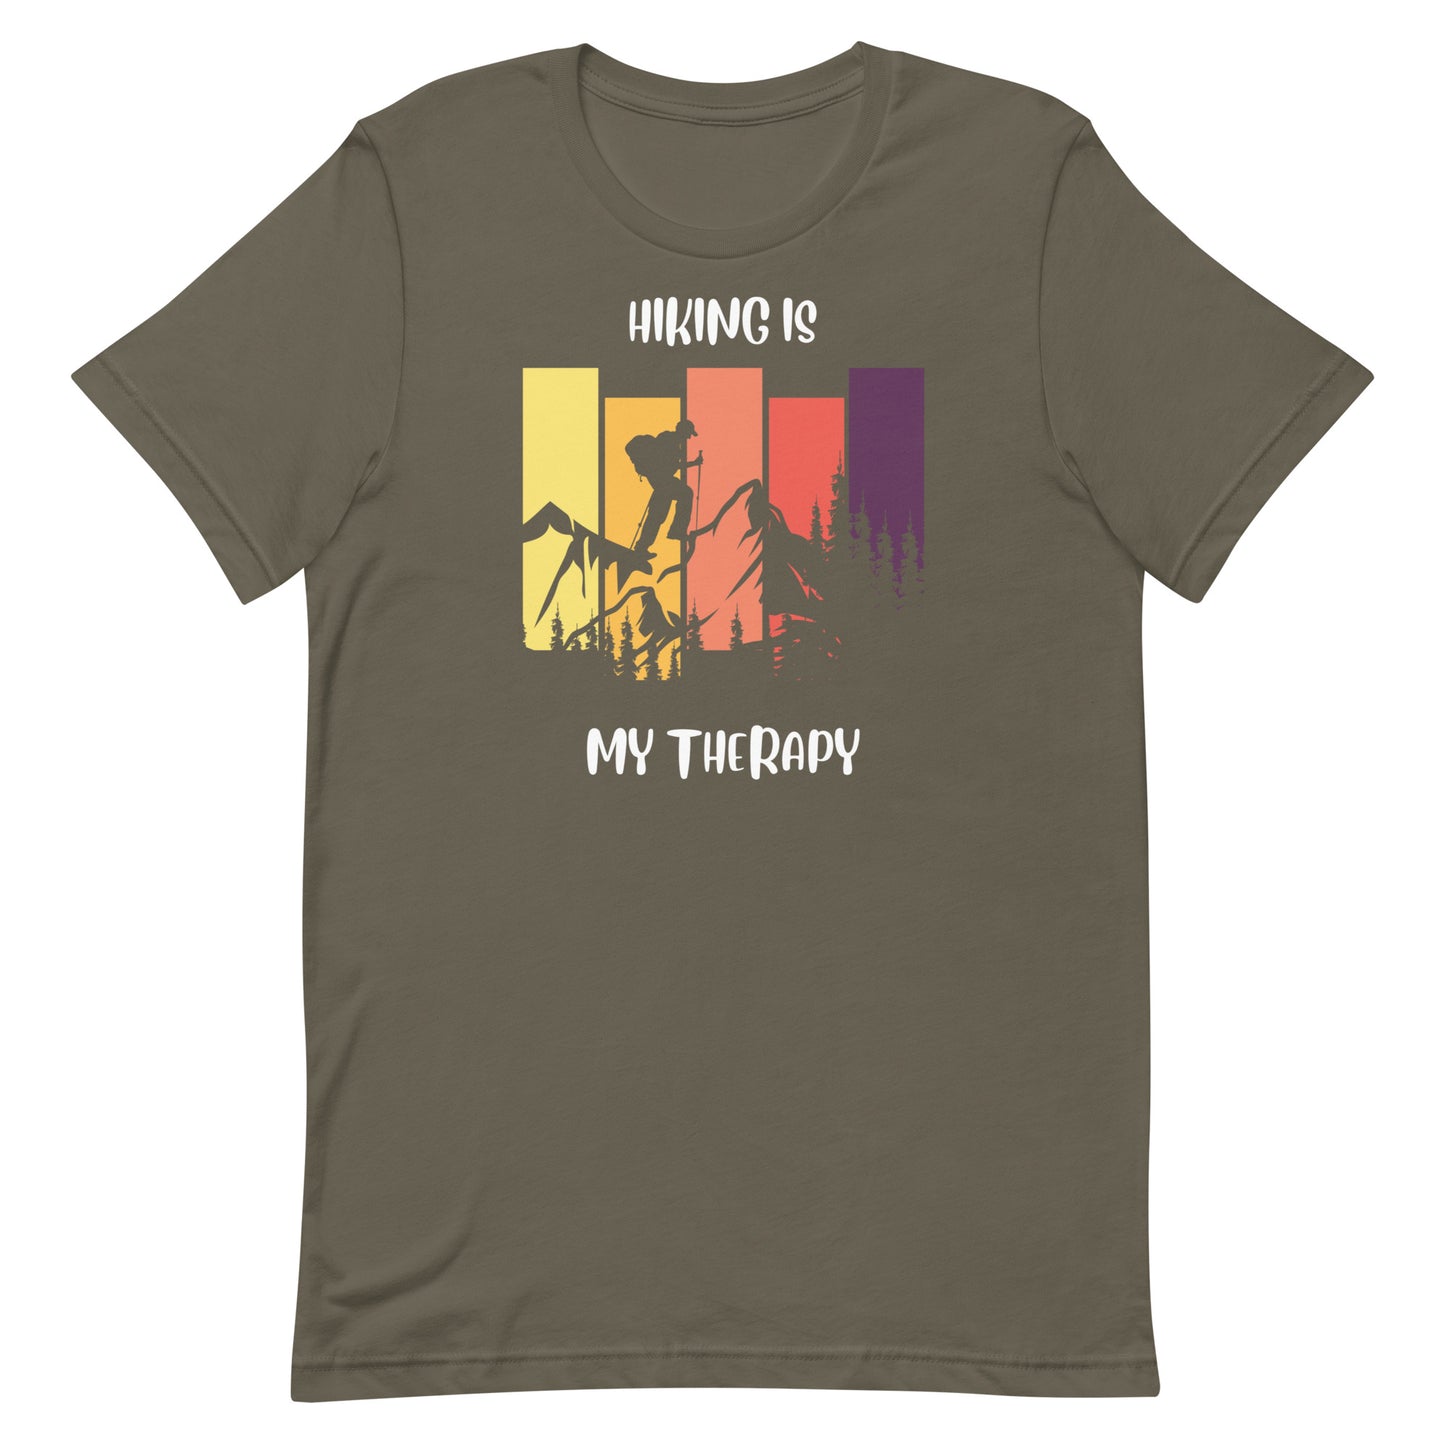 Hiking is my therapy - Unisex t-shirt